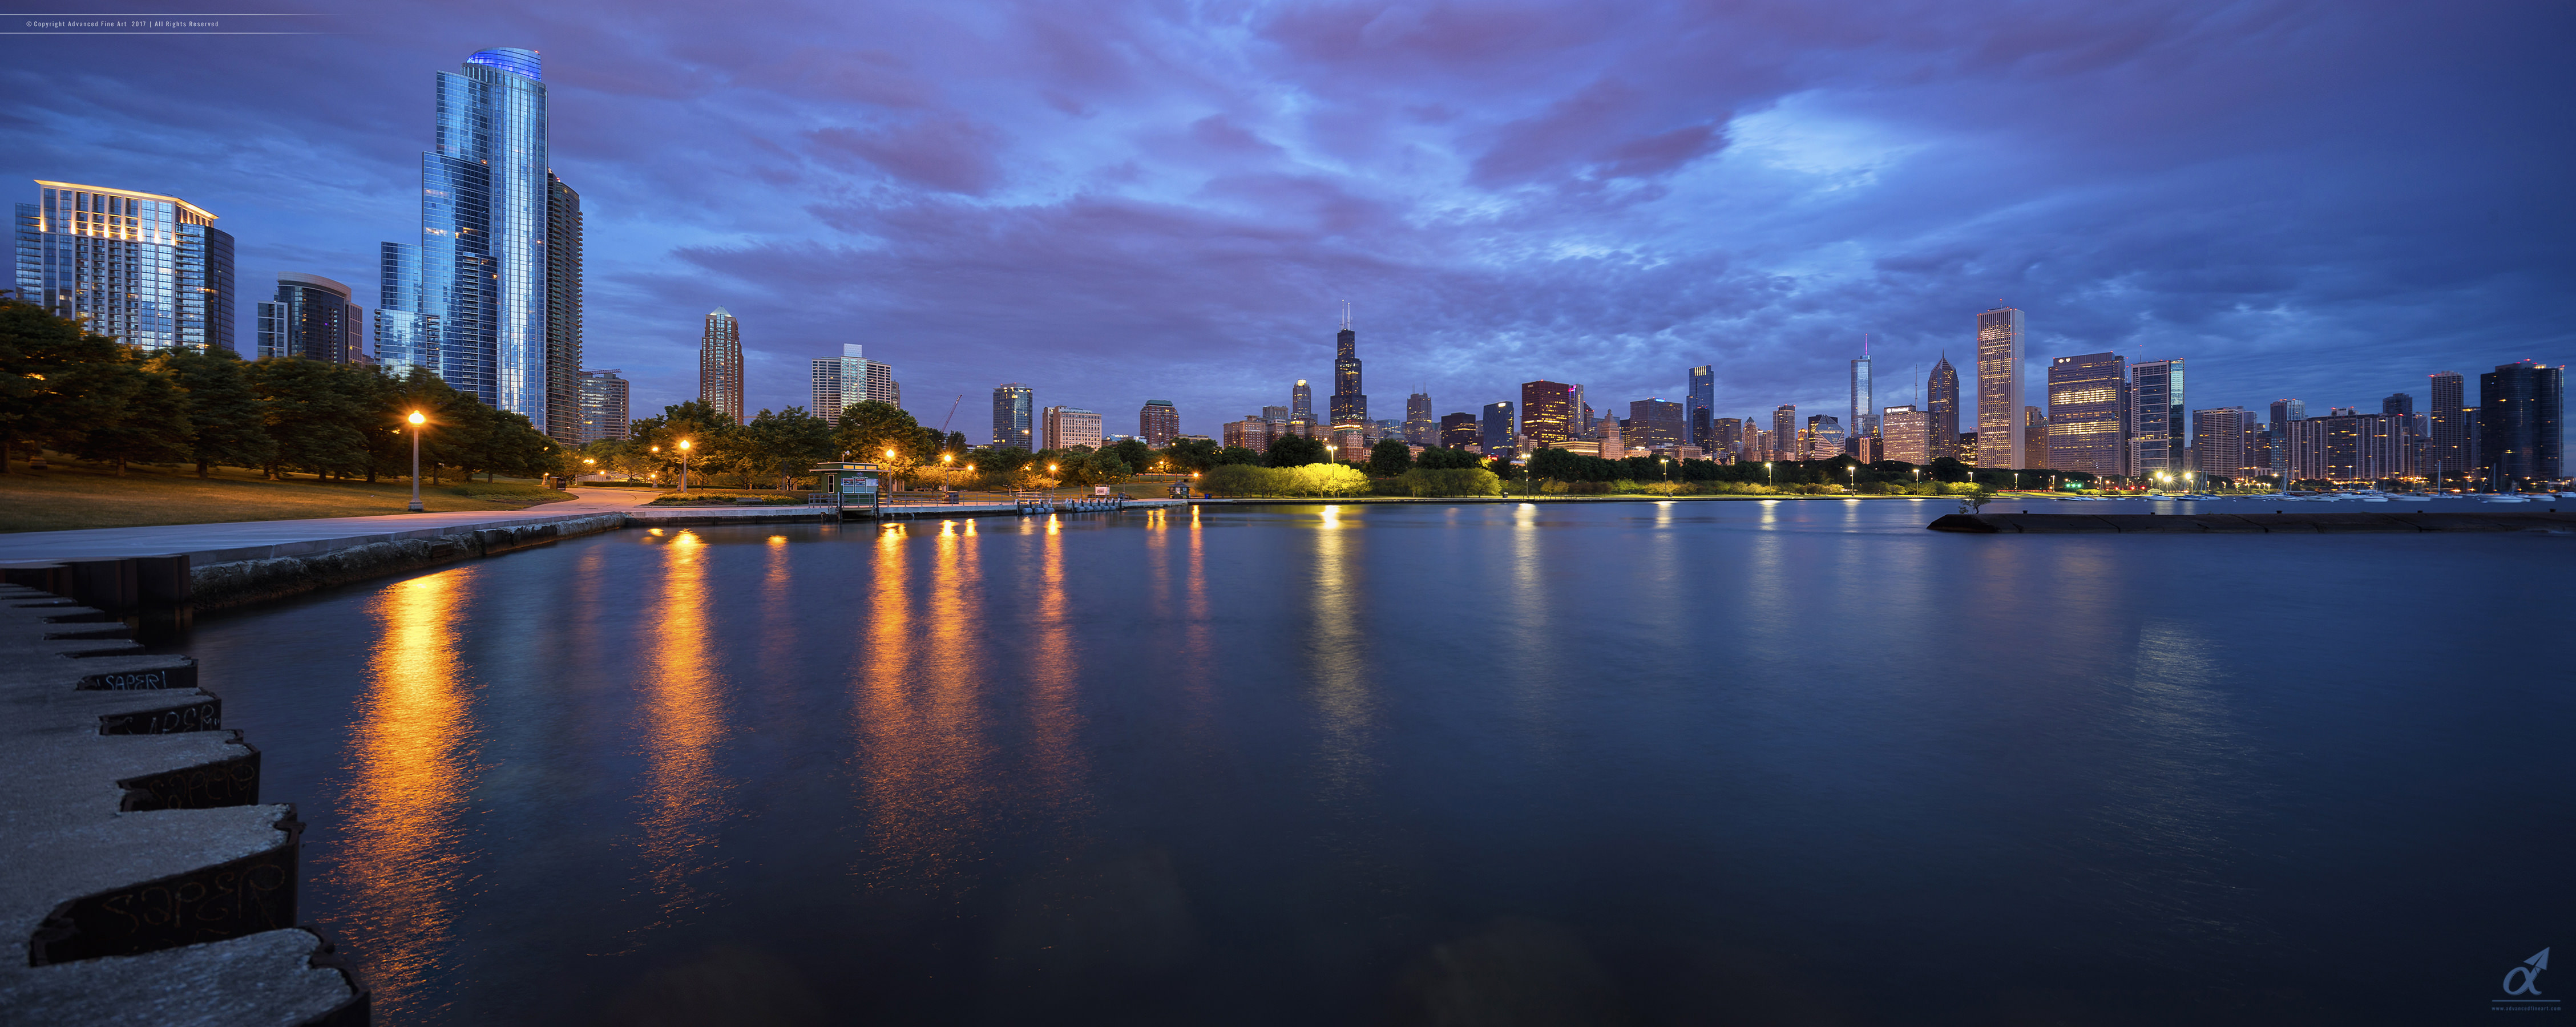 Chicago Skyline CityScape Pano at Dawn